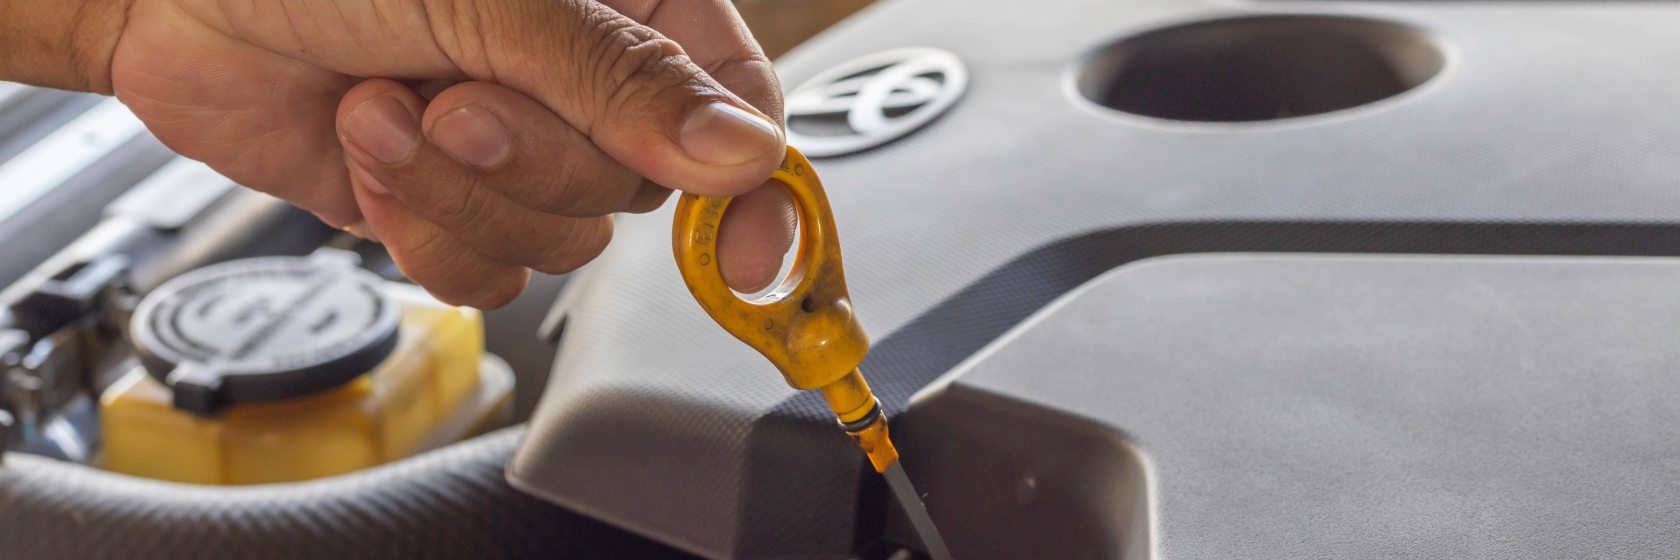 how-to-check-the-engine-oil-level-of-toyota-cars